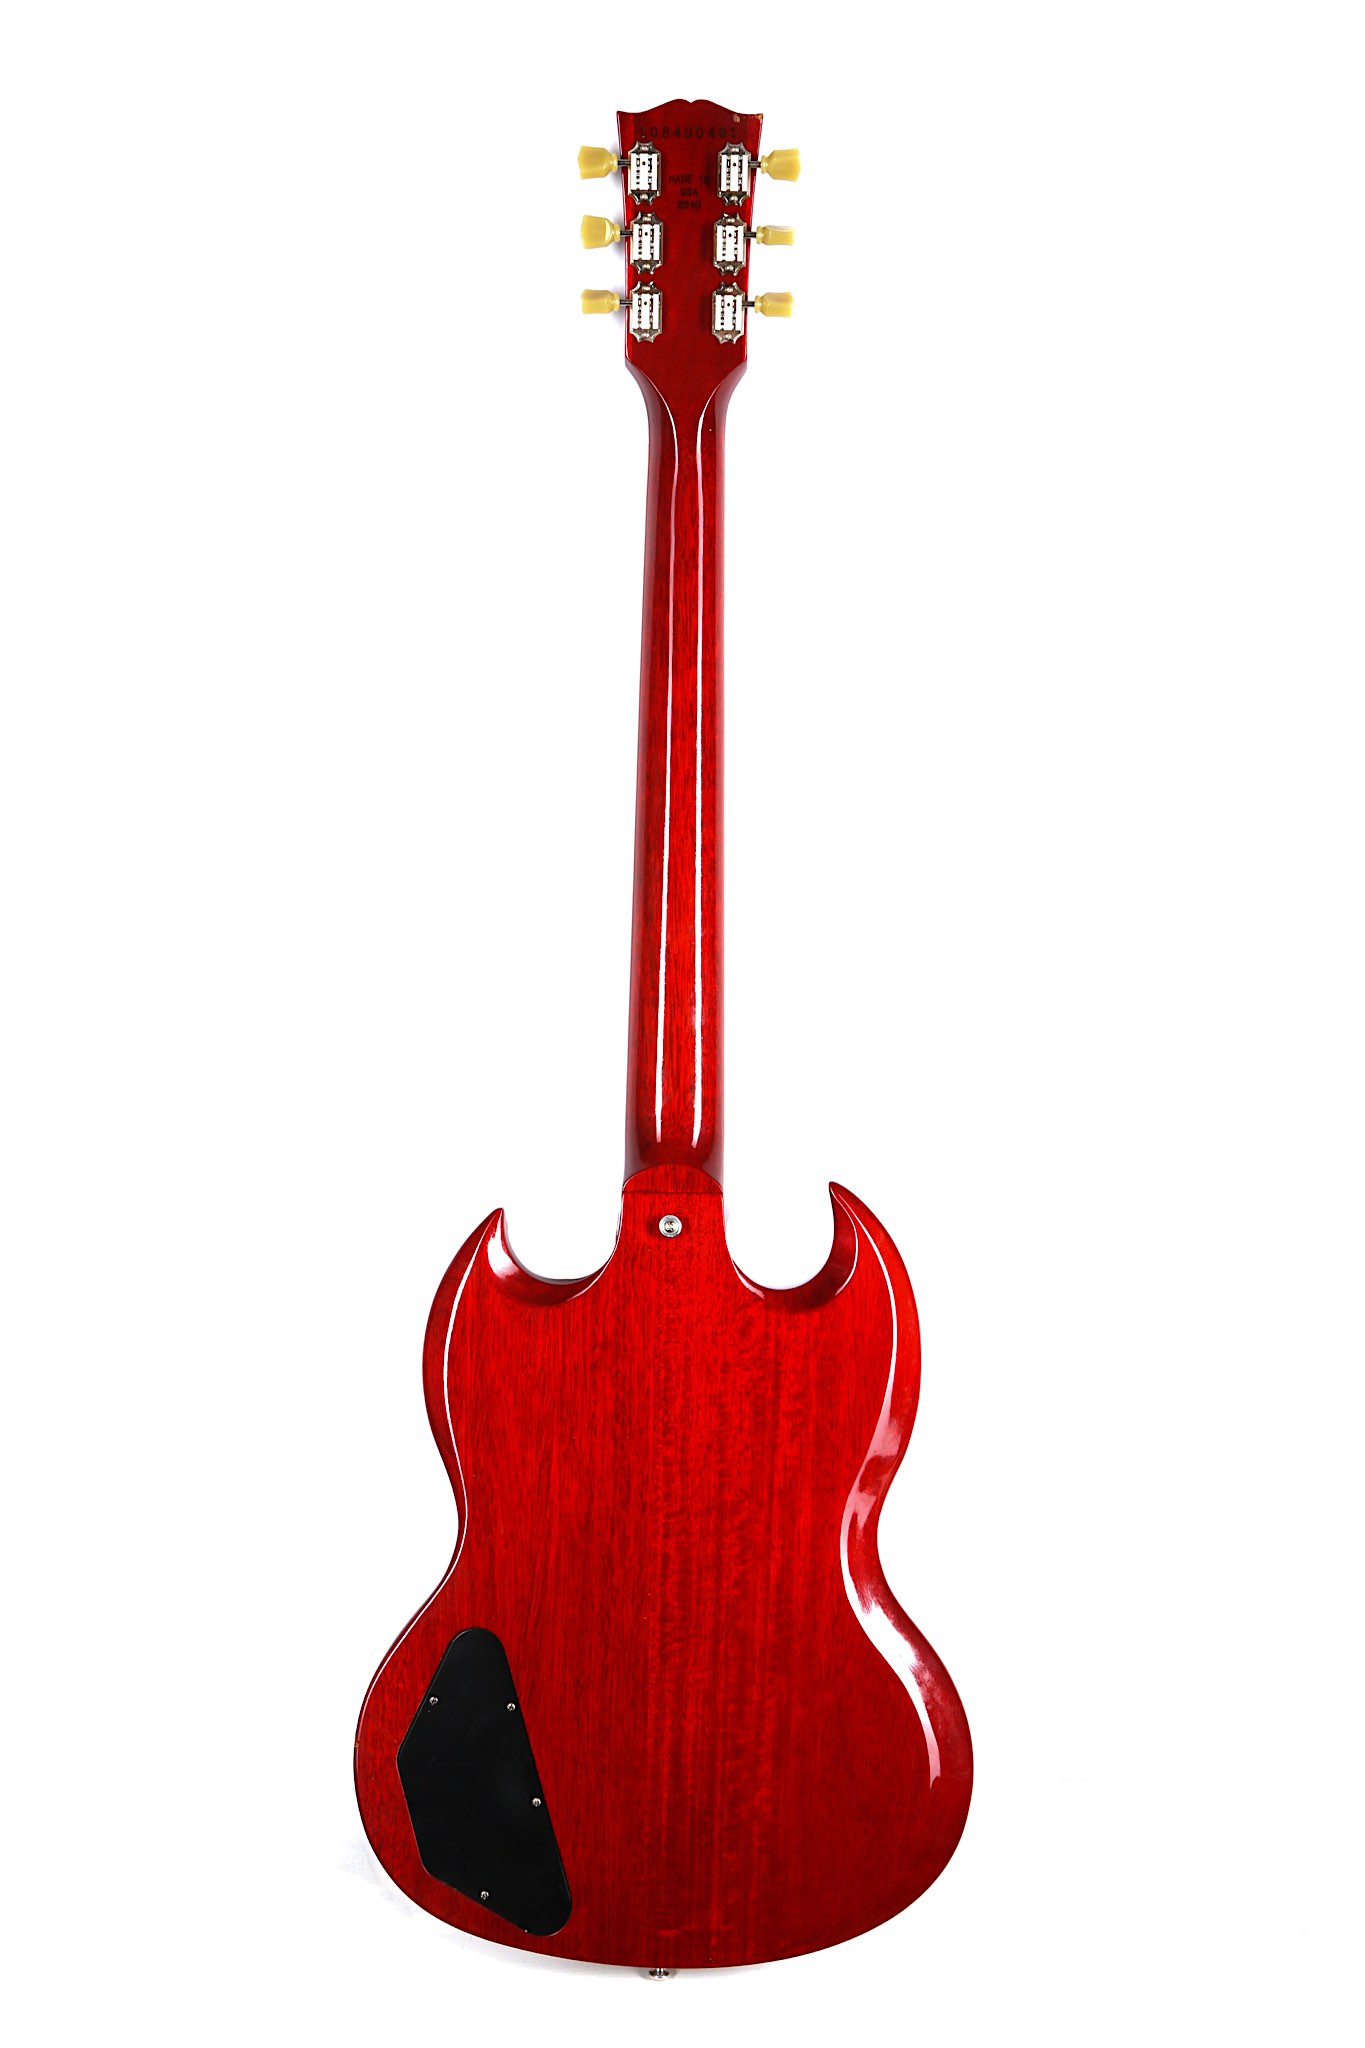 A 2010 Gibson SG Standard in Cherry Red with Case - Image 5 of 6